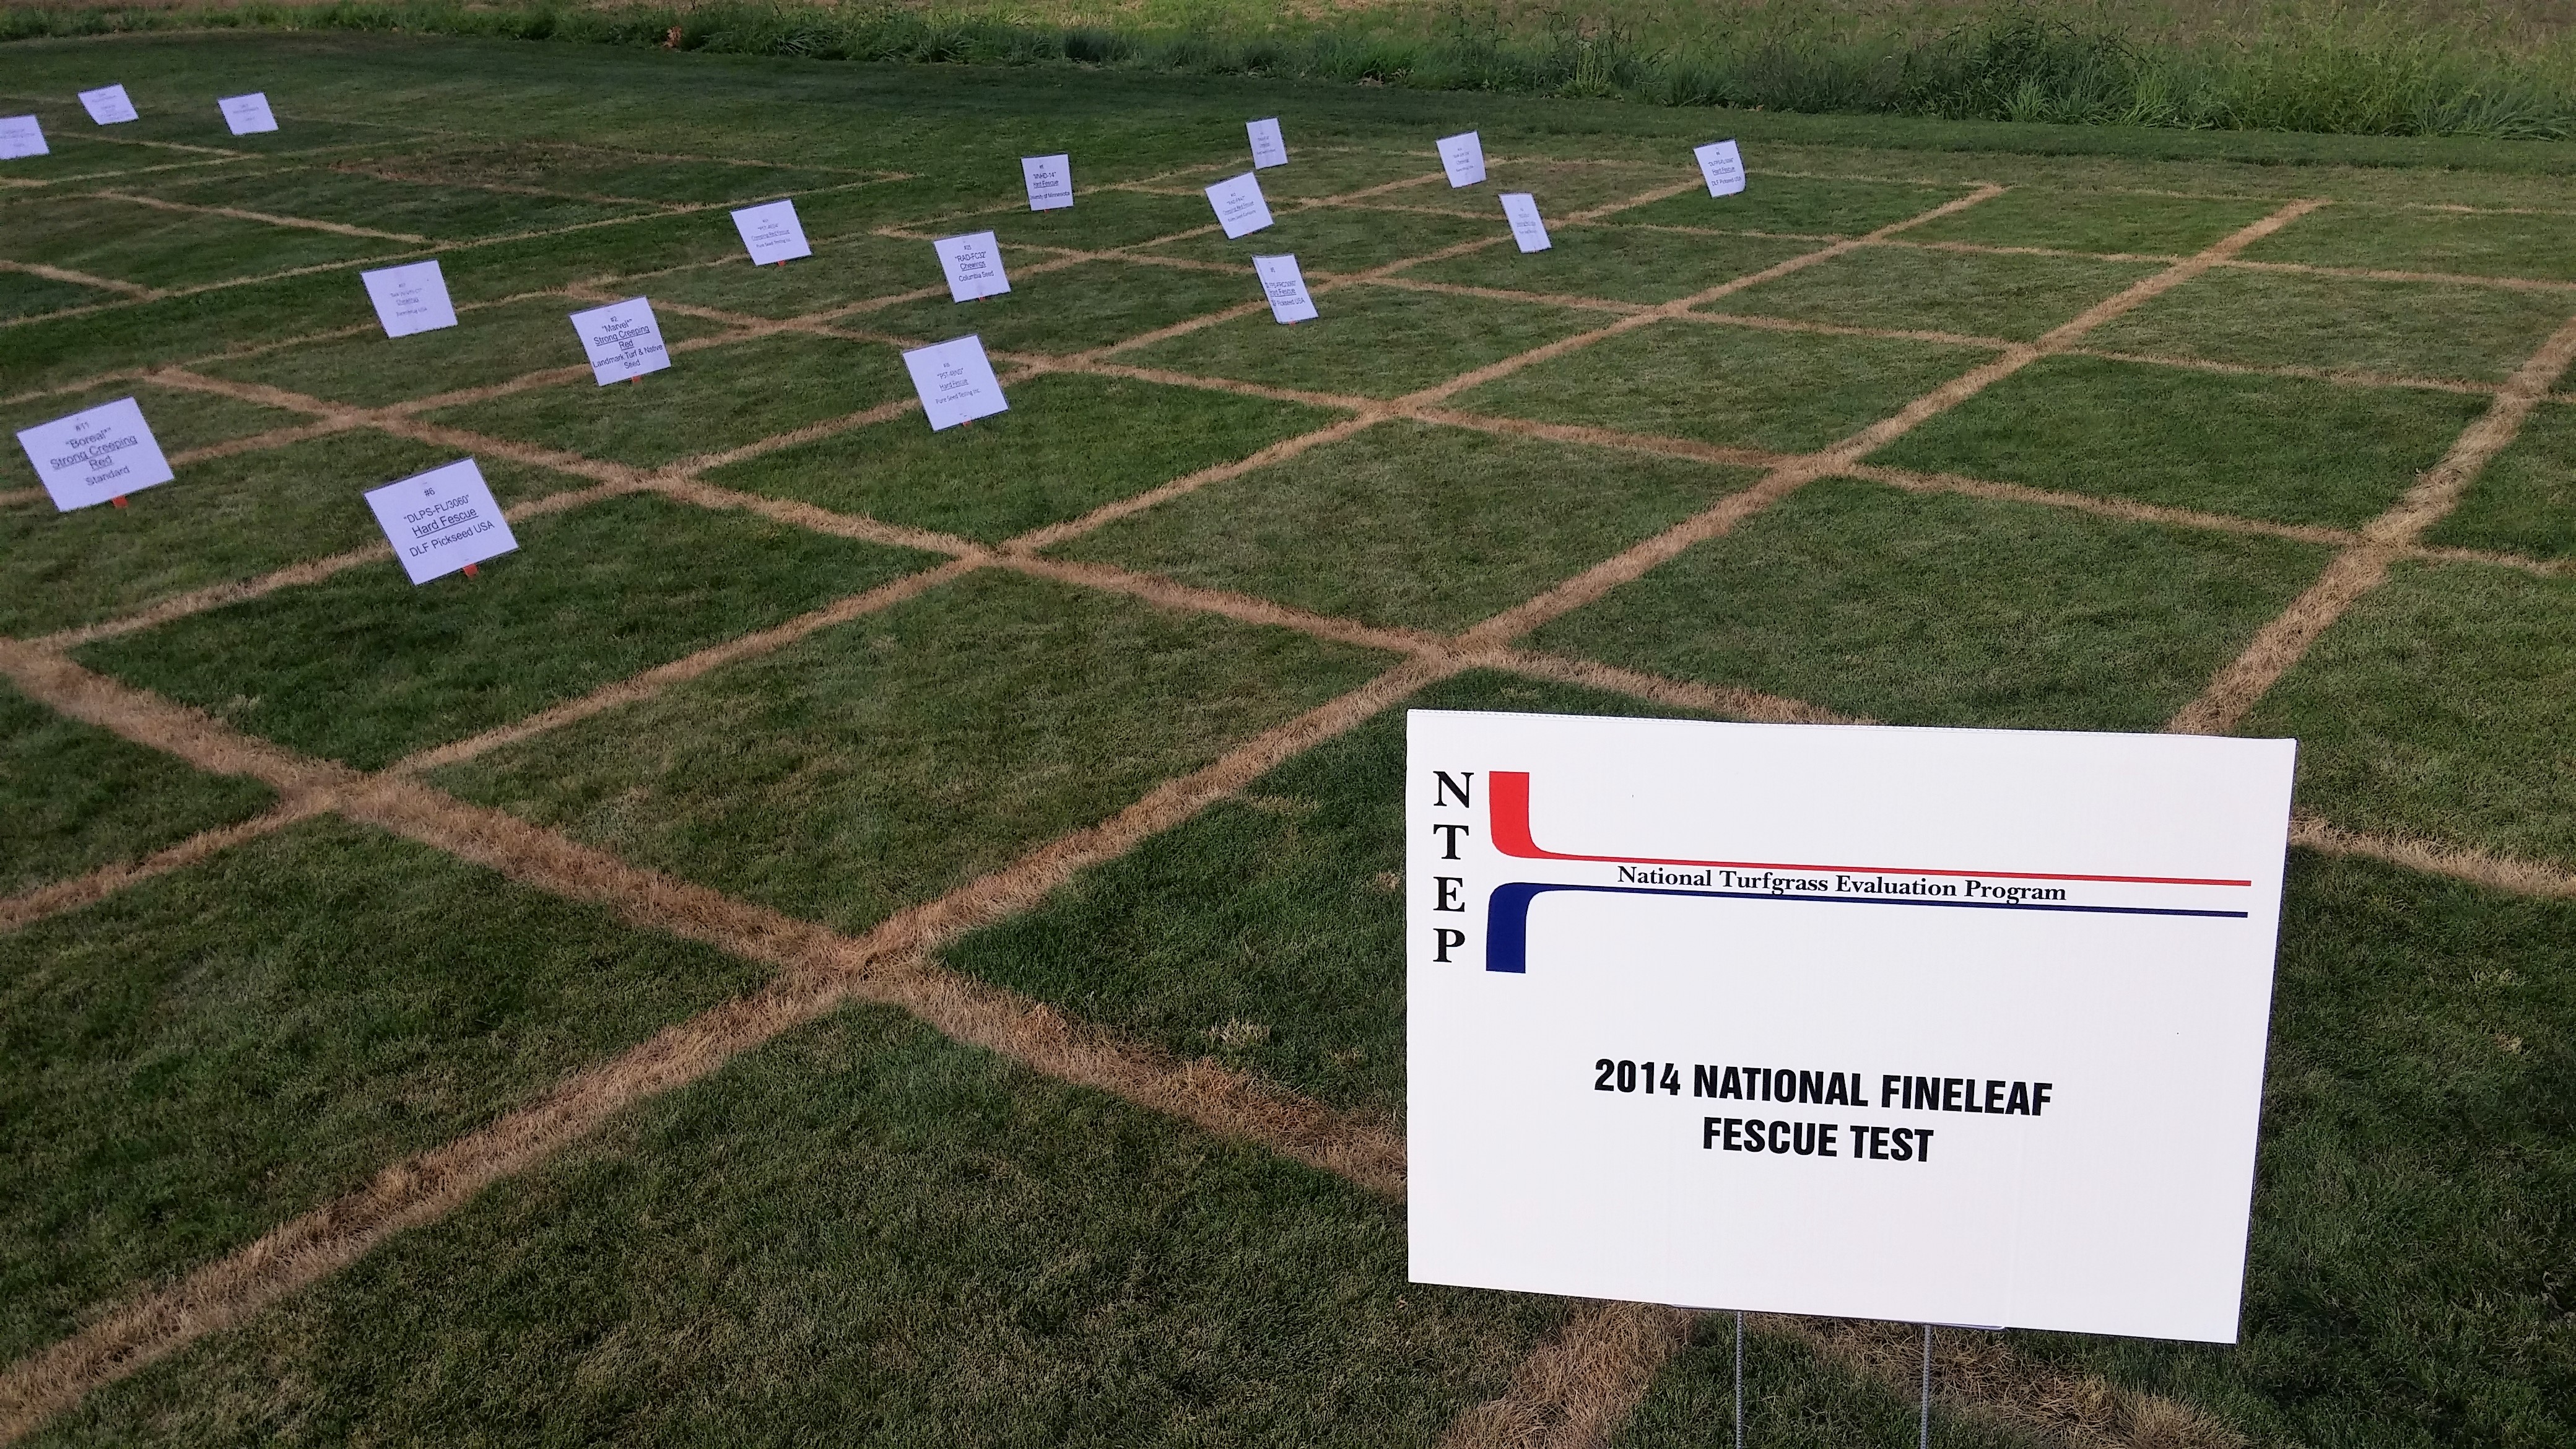 Square turfgrass research plots labeled with signs